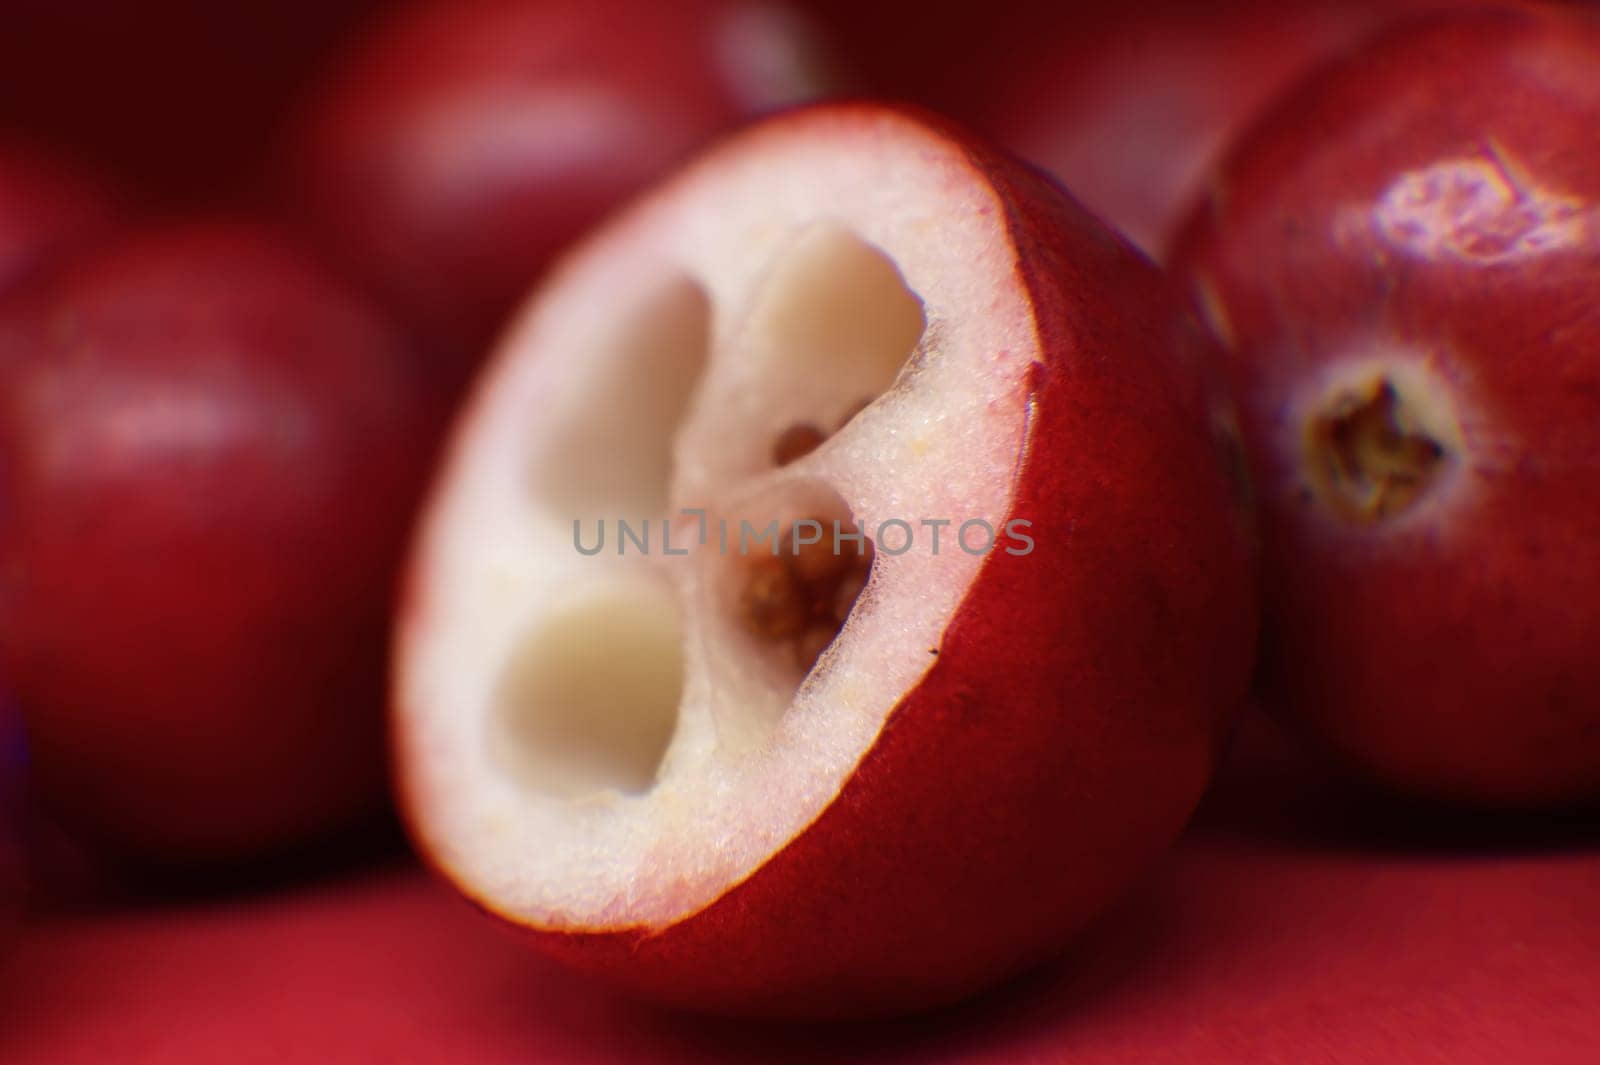 Cranberry cut in half, revealing a white interior by NetPix